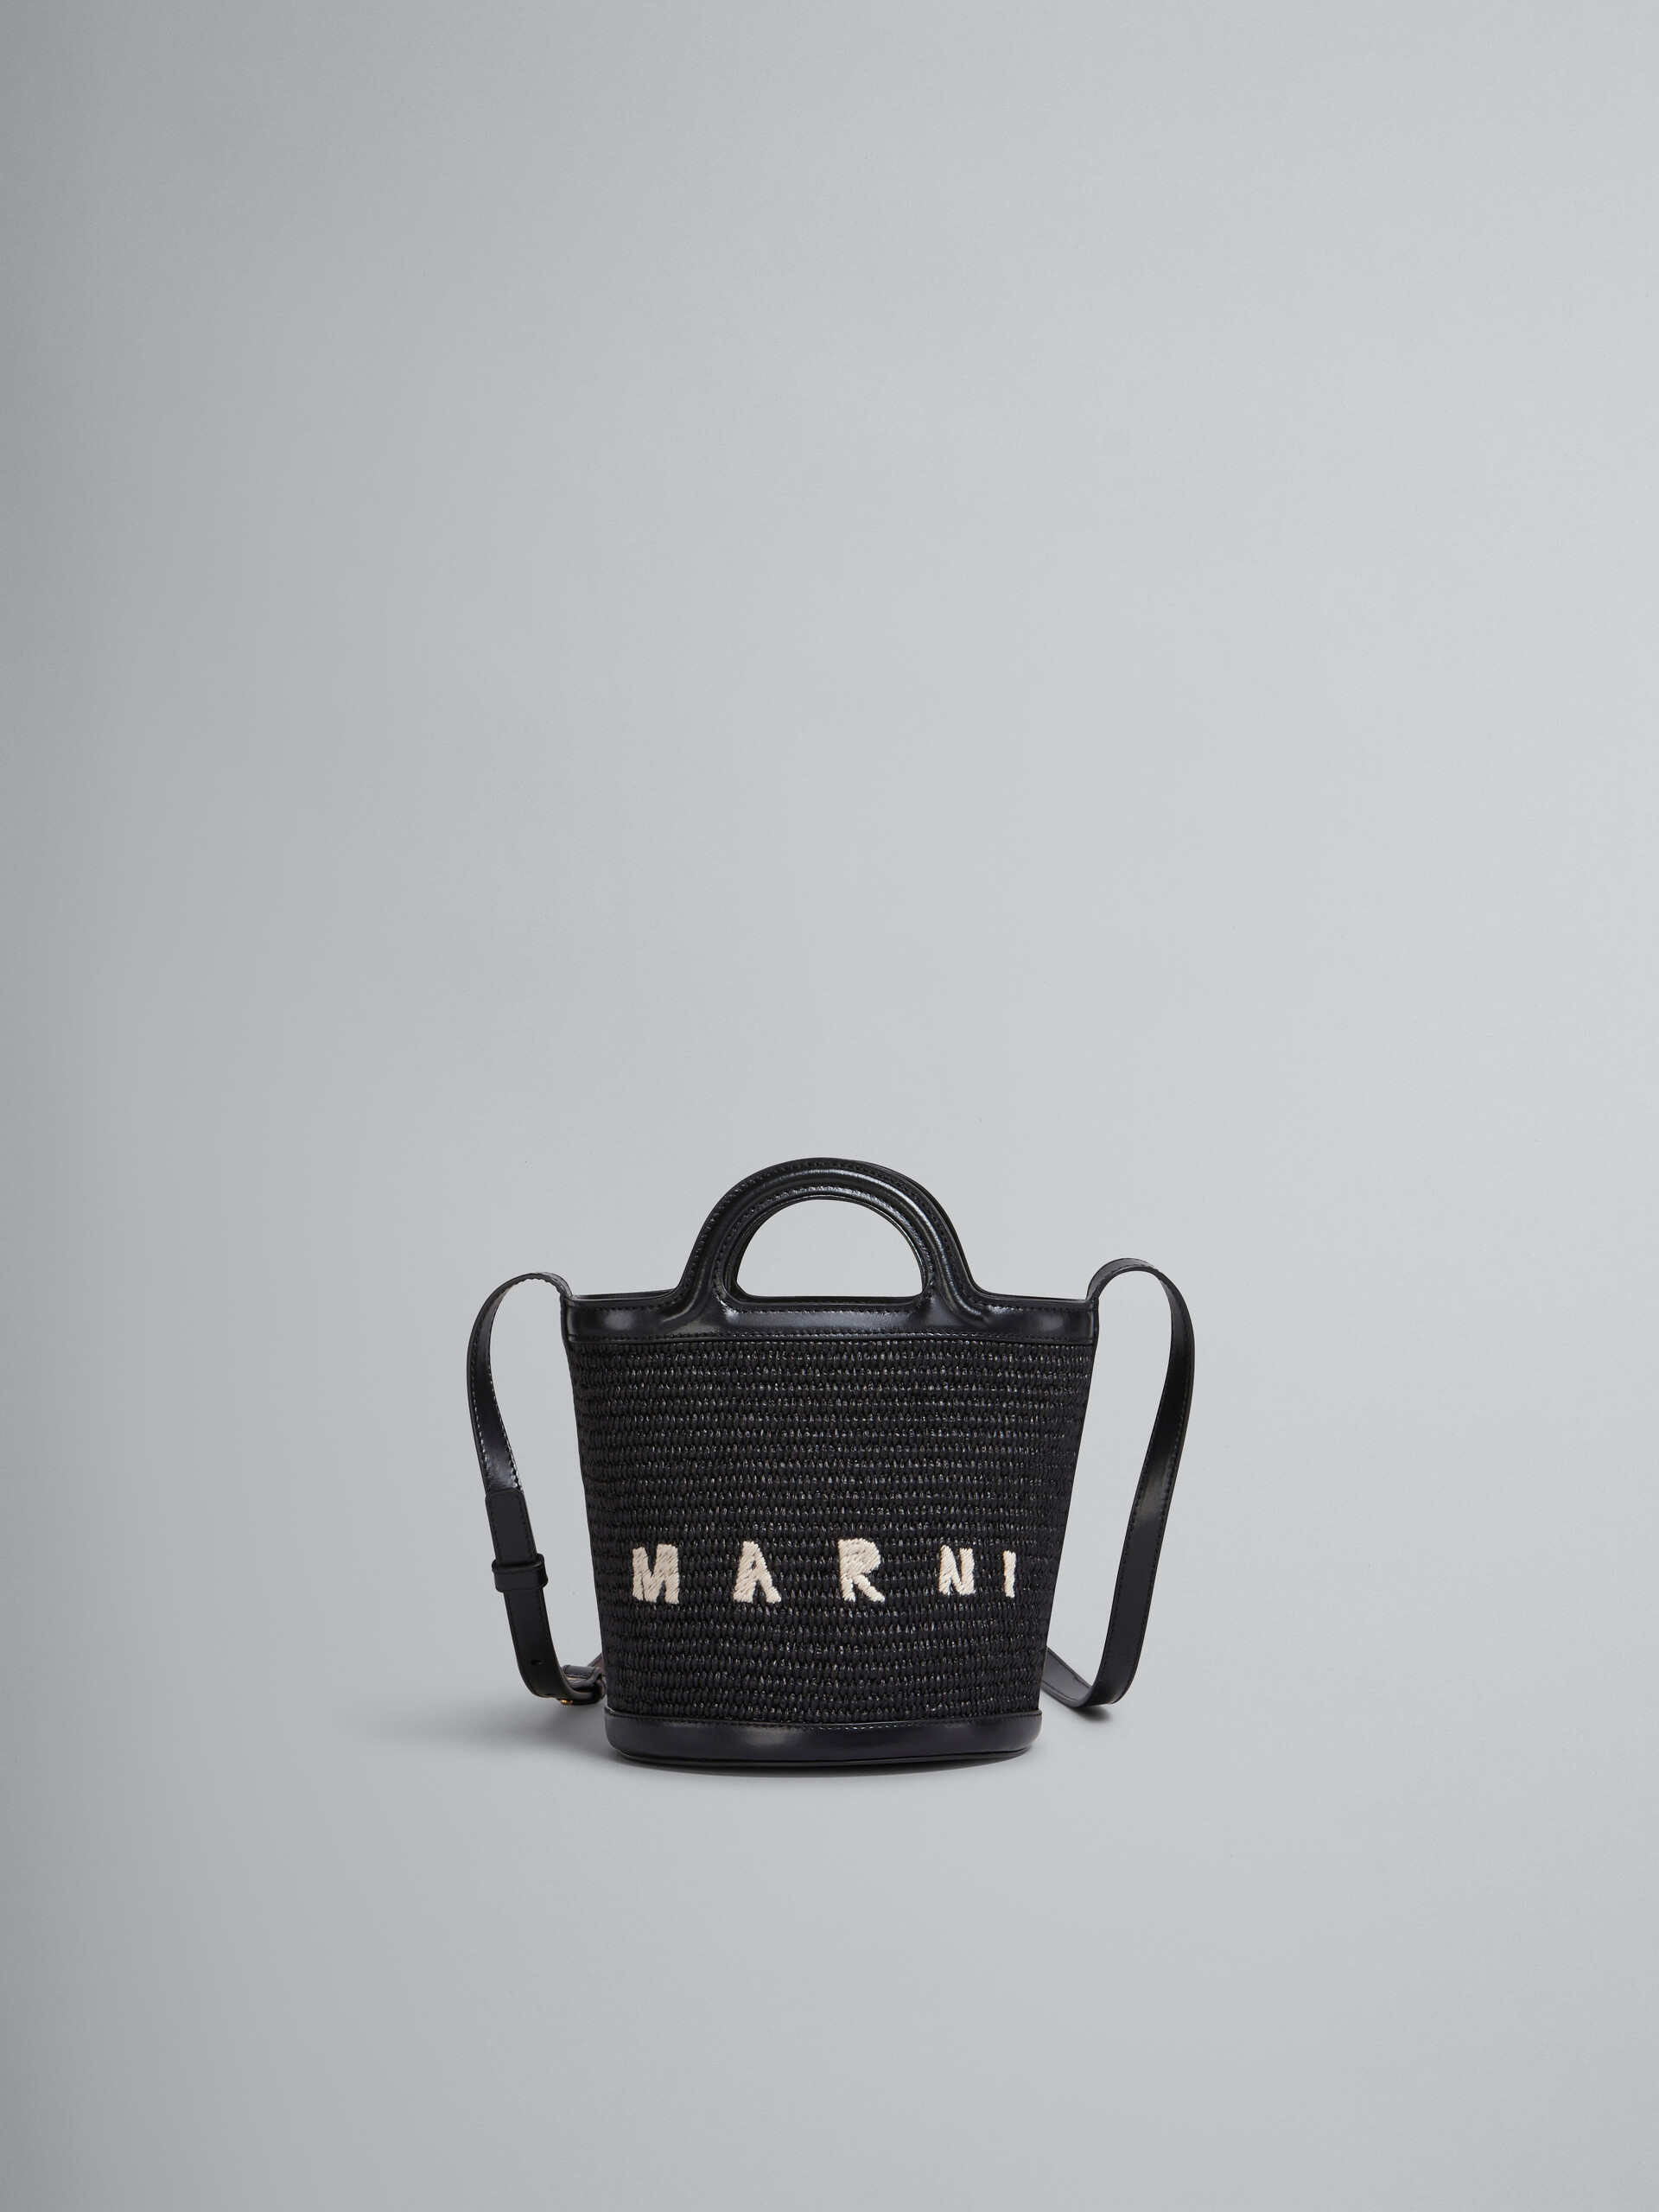 Tropicalia Small Bucket Bag in black leather and raffia - Shoulder Bags - Image 1